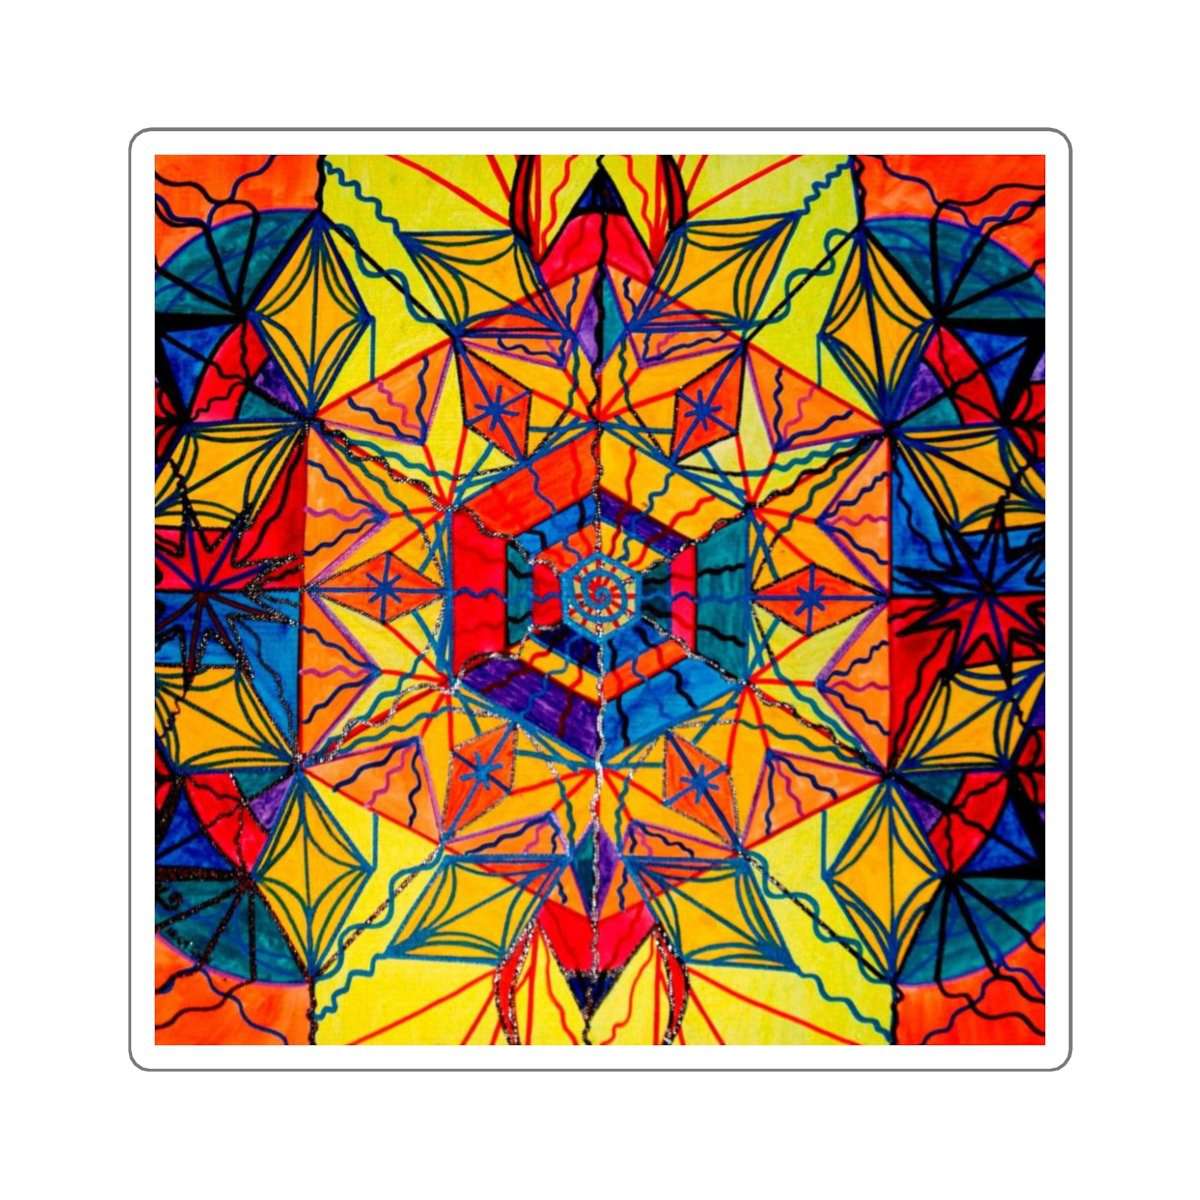 buy-cheap-wholesale-excitement-square-stickers-online-now_2.jpg